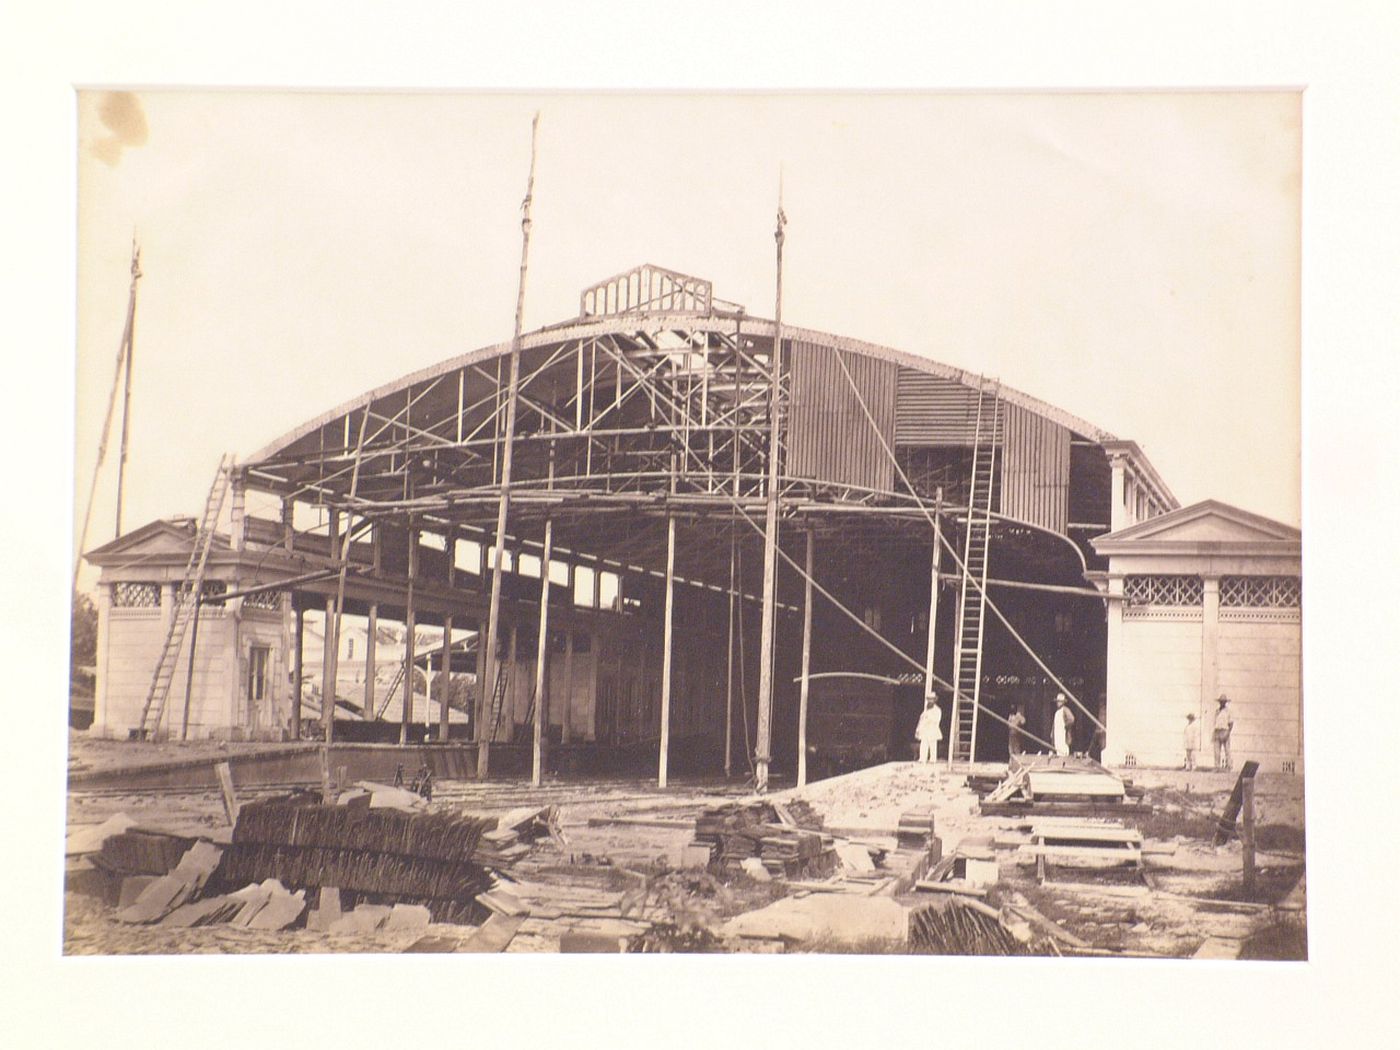 Bahia Station under construction, view of north end train entrance, Bahia State, Brazil